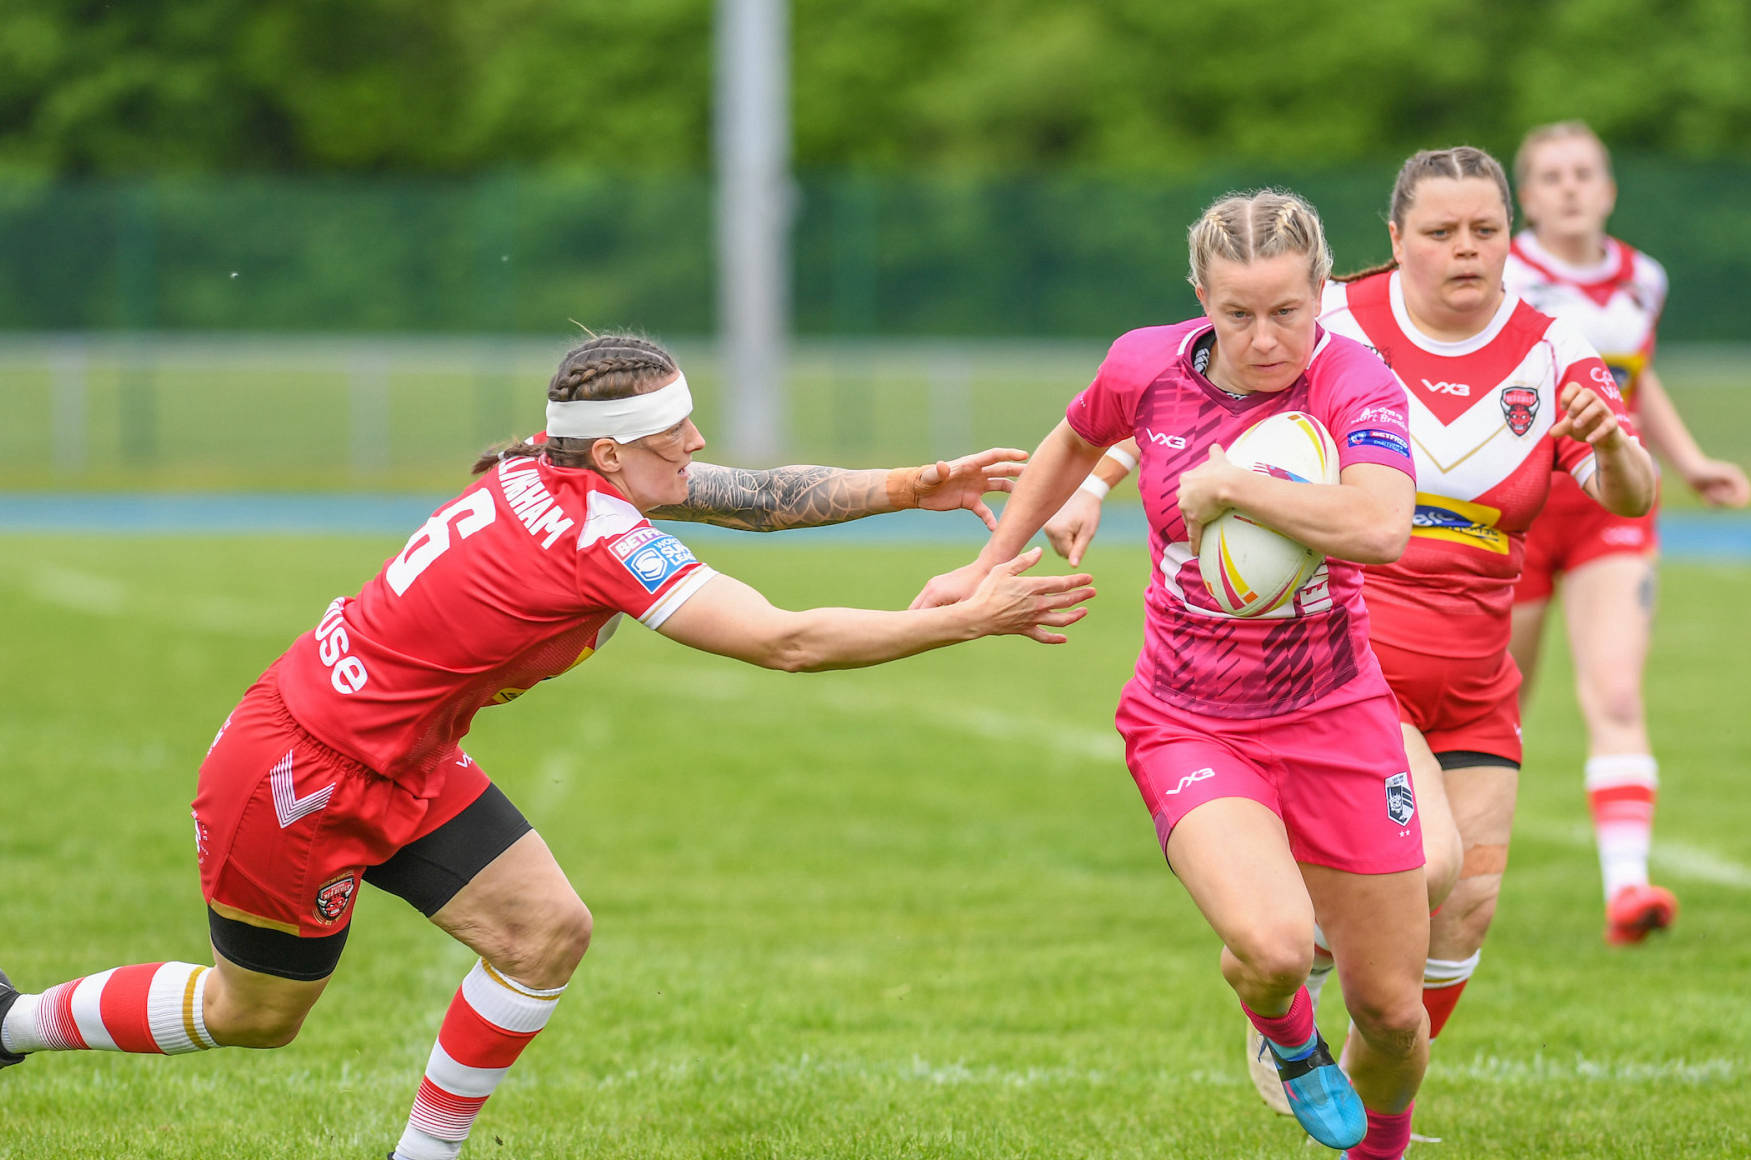 Cardiff Demons continue to make history in Women’s Rugby League